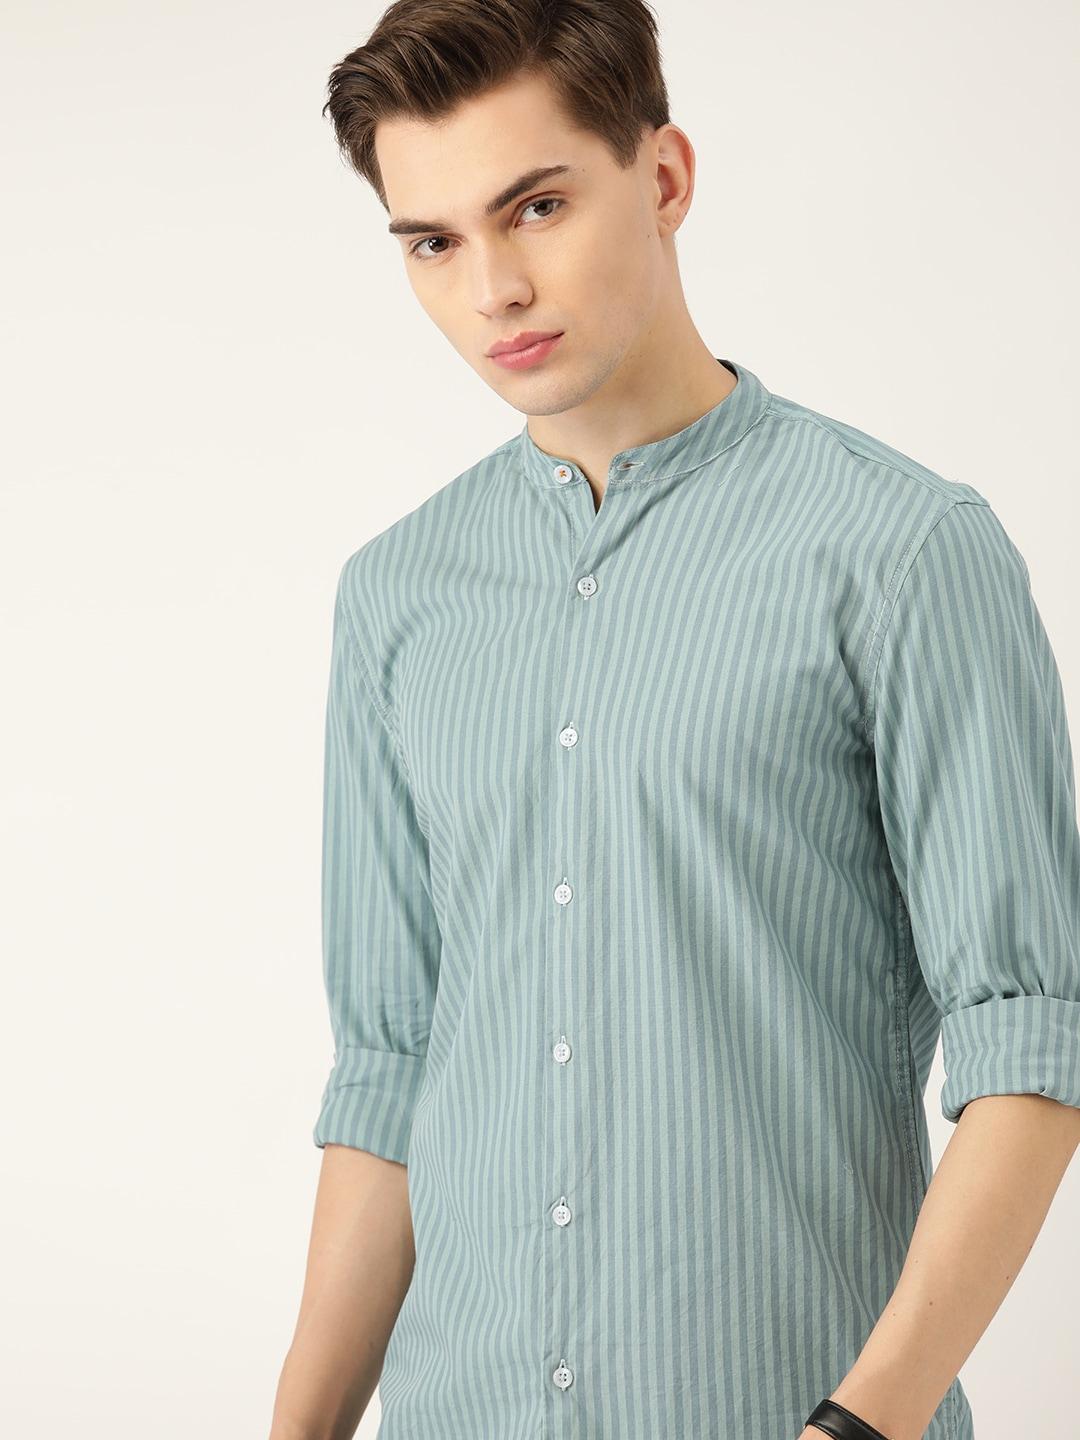 invictus-men-green-&-blue-pure-cotton-striped-sustainable-casual-shirt